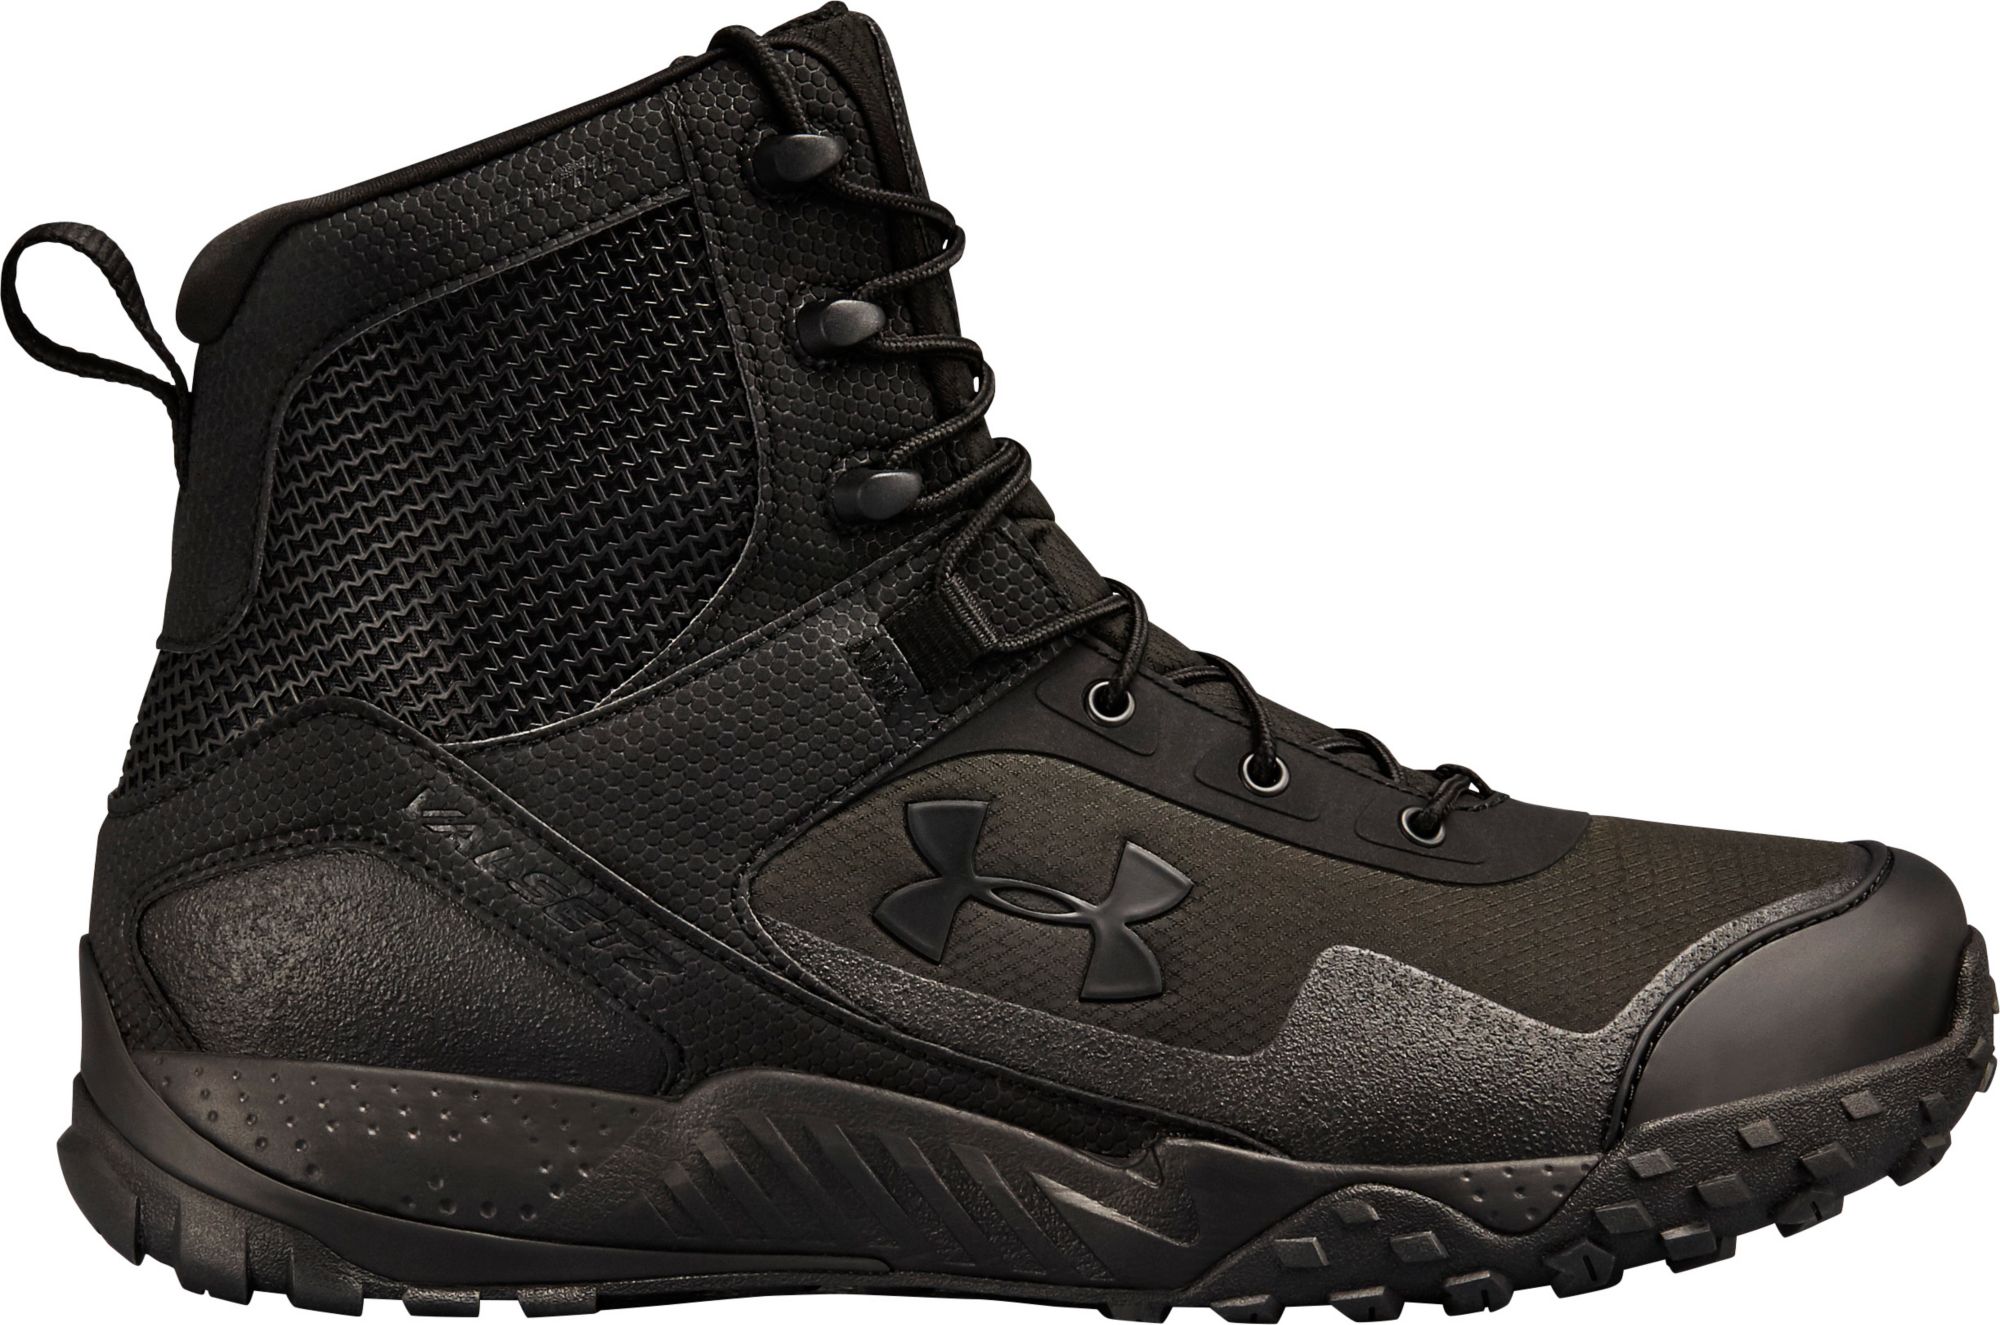 under armour work boots